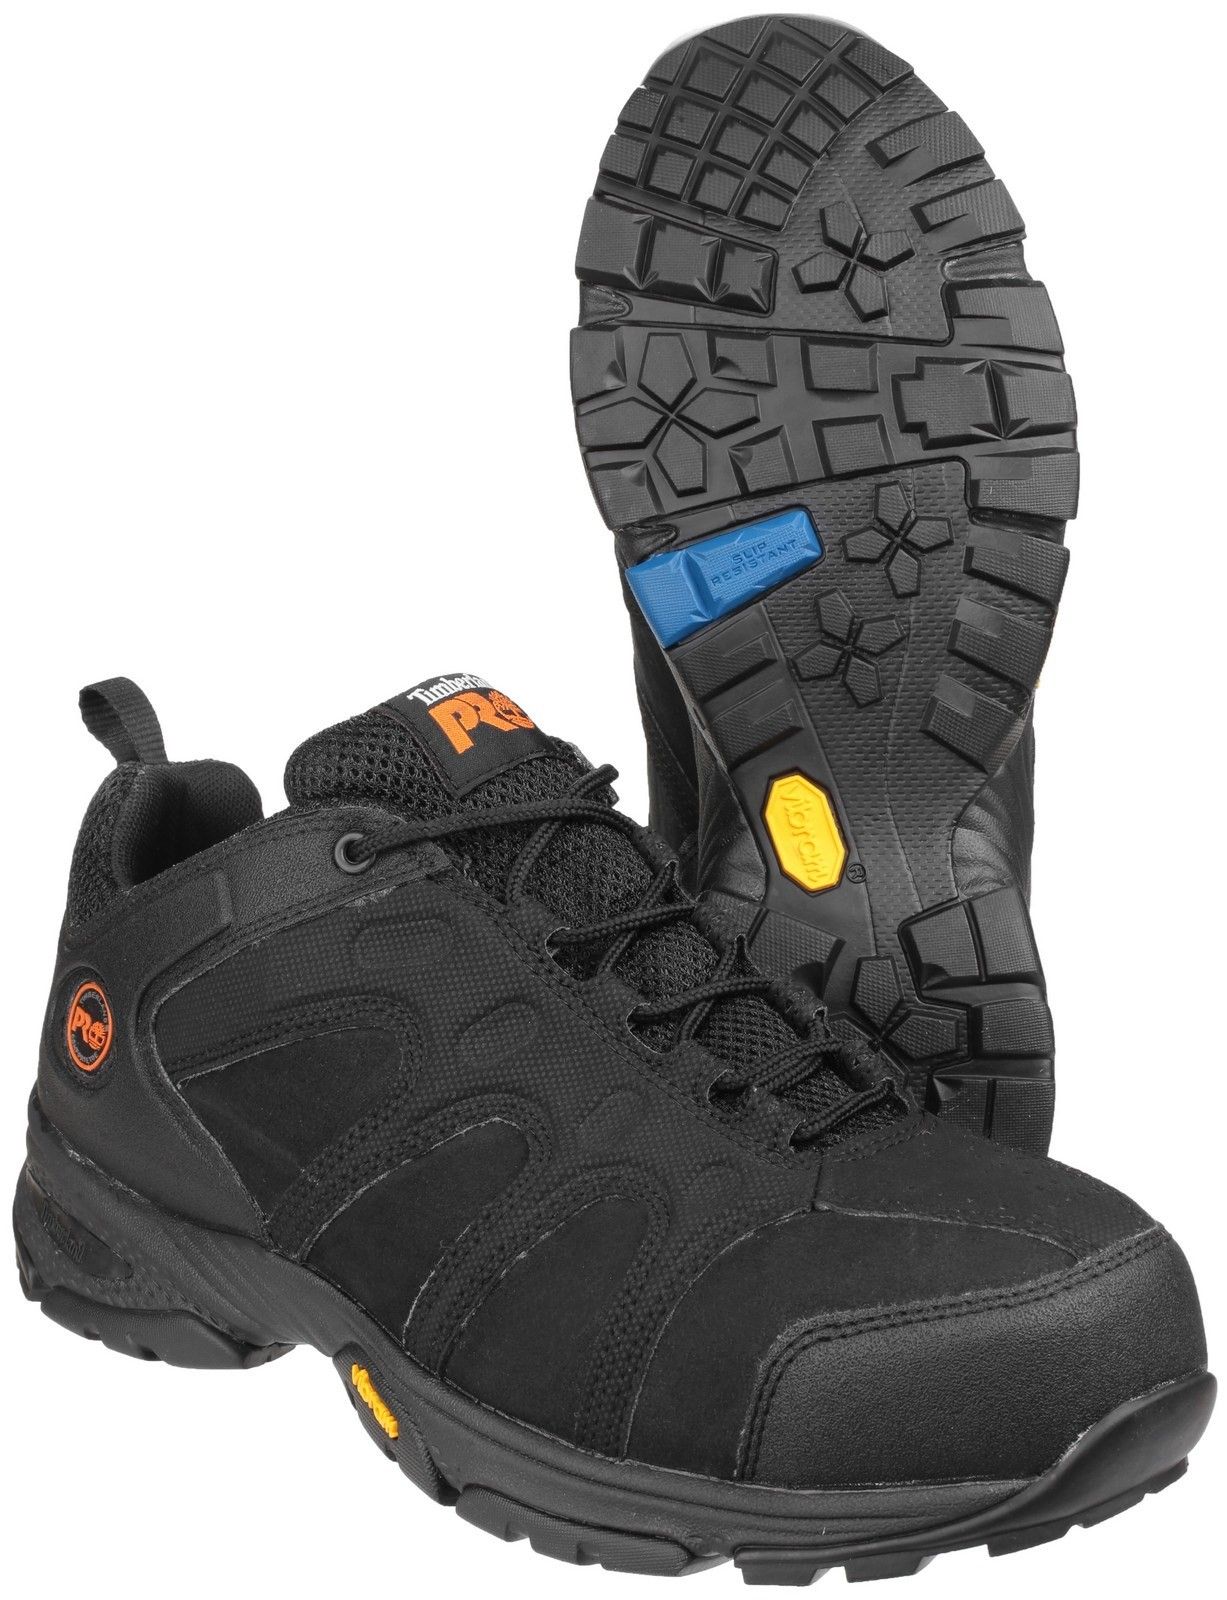 PROTECTION 24/7: The Timberland PRO Wildcard athletic work shoe features a composite safety toe, padded top collar, puncture-resistant plate, and a slip and oil-resistant Vibram rubber outsole, allowing for casual style and uncompromised protection.Timberland PRO Wildcard rugged low hiker with impact and compression resistant toe cap. 
Anti-static with an energy absorbing heel. 
Penetration resistance 1100 Newtons. 
300 degrees high heat resistance. 
Slip resistance SRA - Resistance against slipping on ceramic surfaces covered with water and cleaning products.